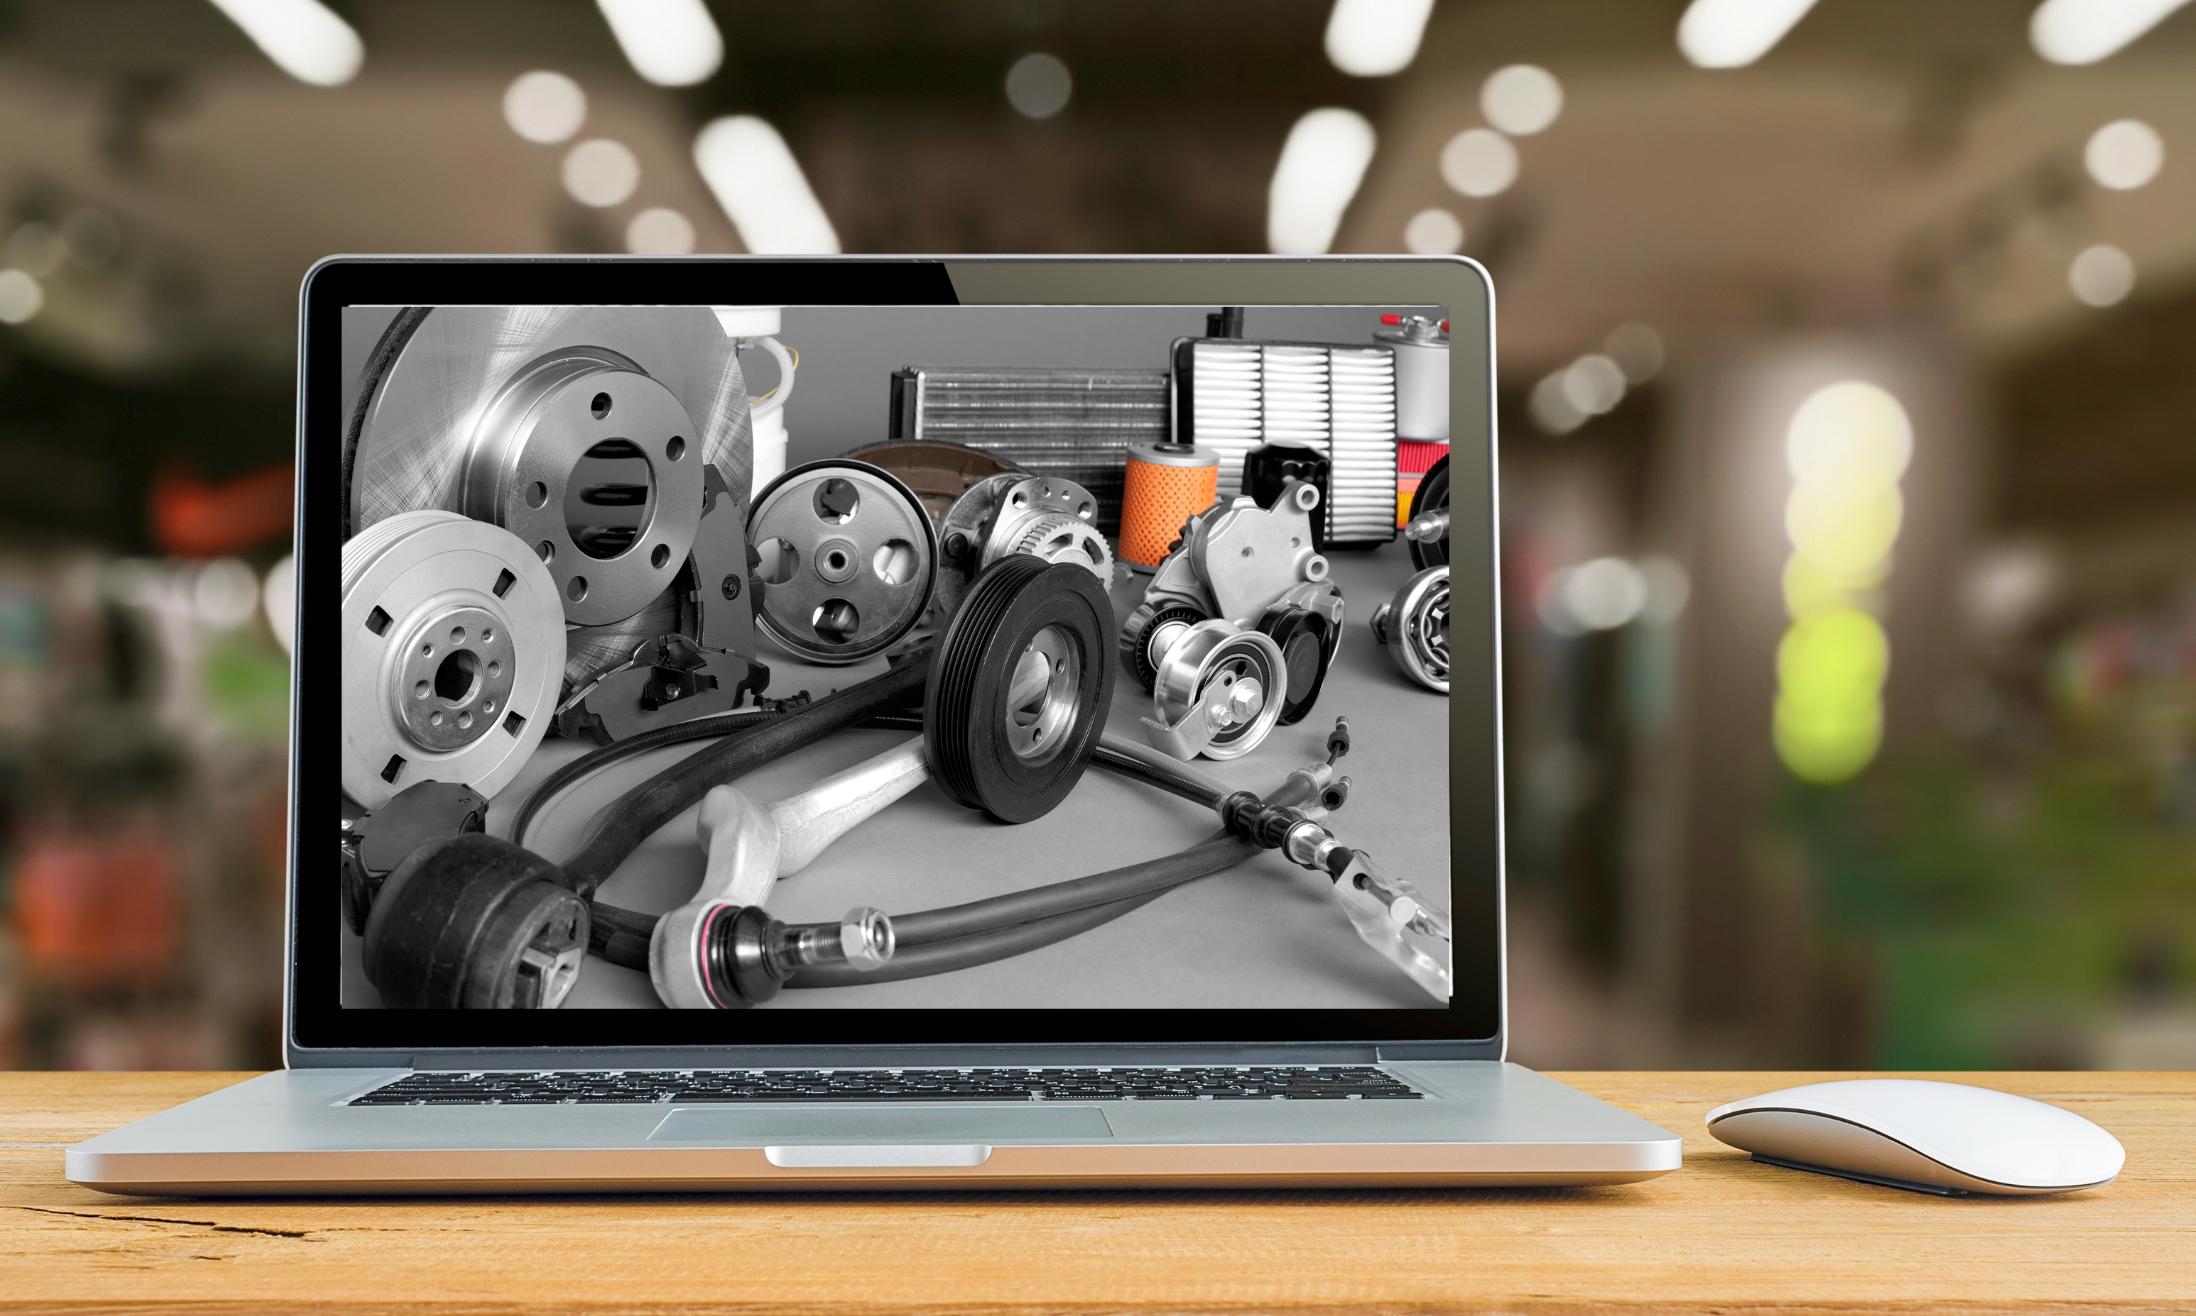 Top 13 Auto Parts Websites: Where To Find The Best Deals